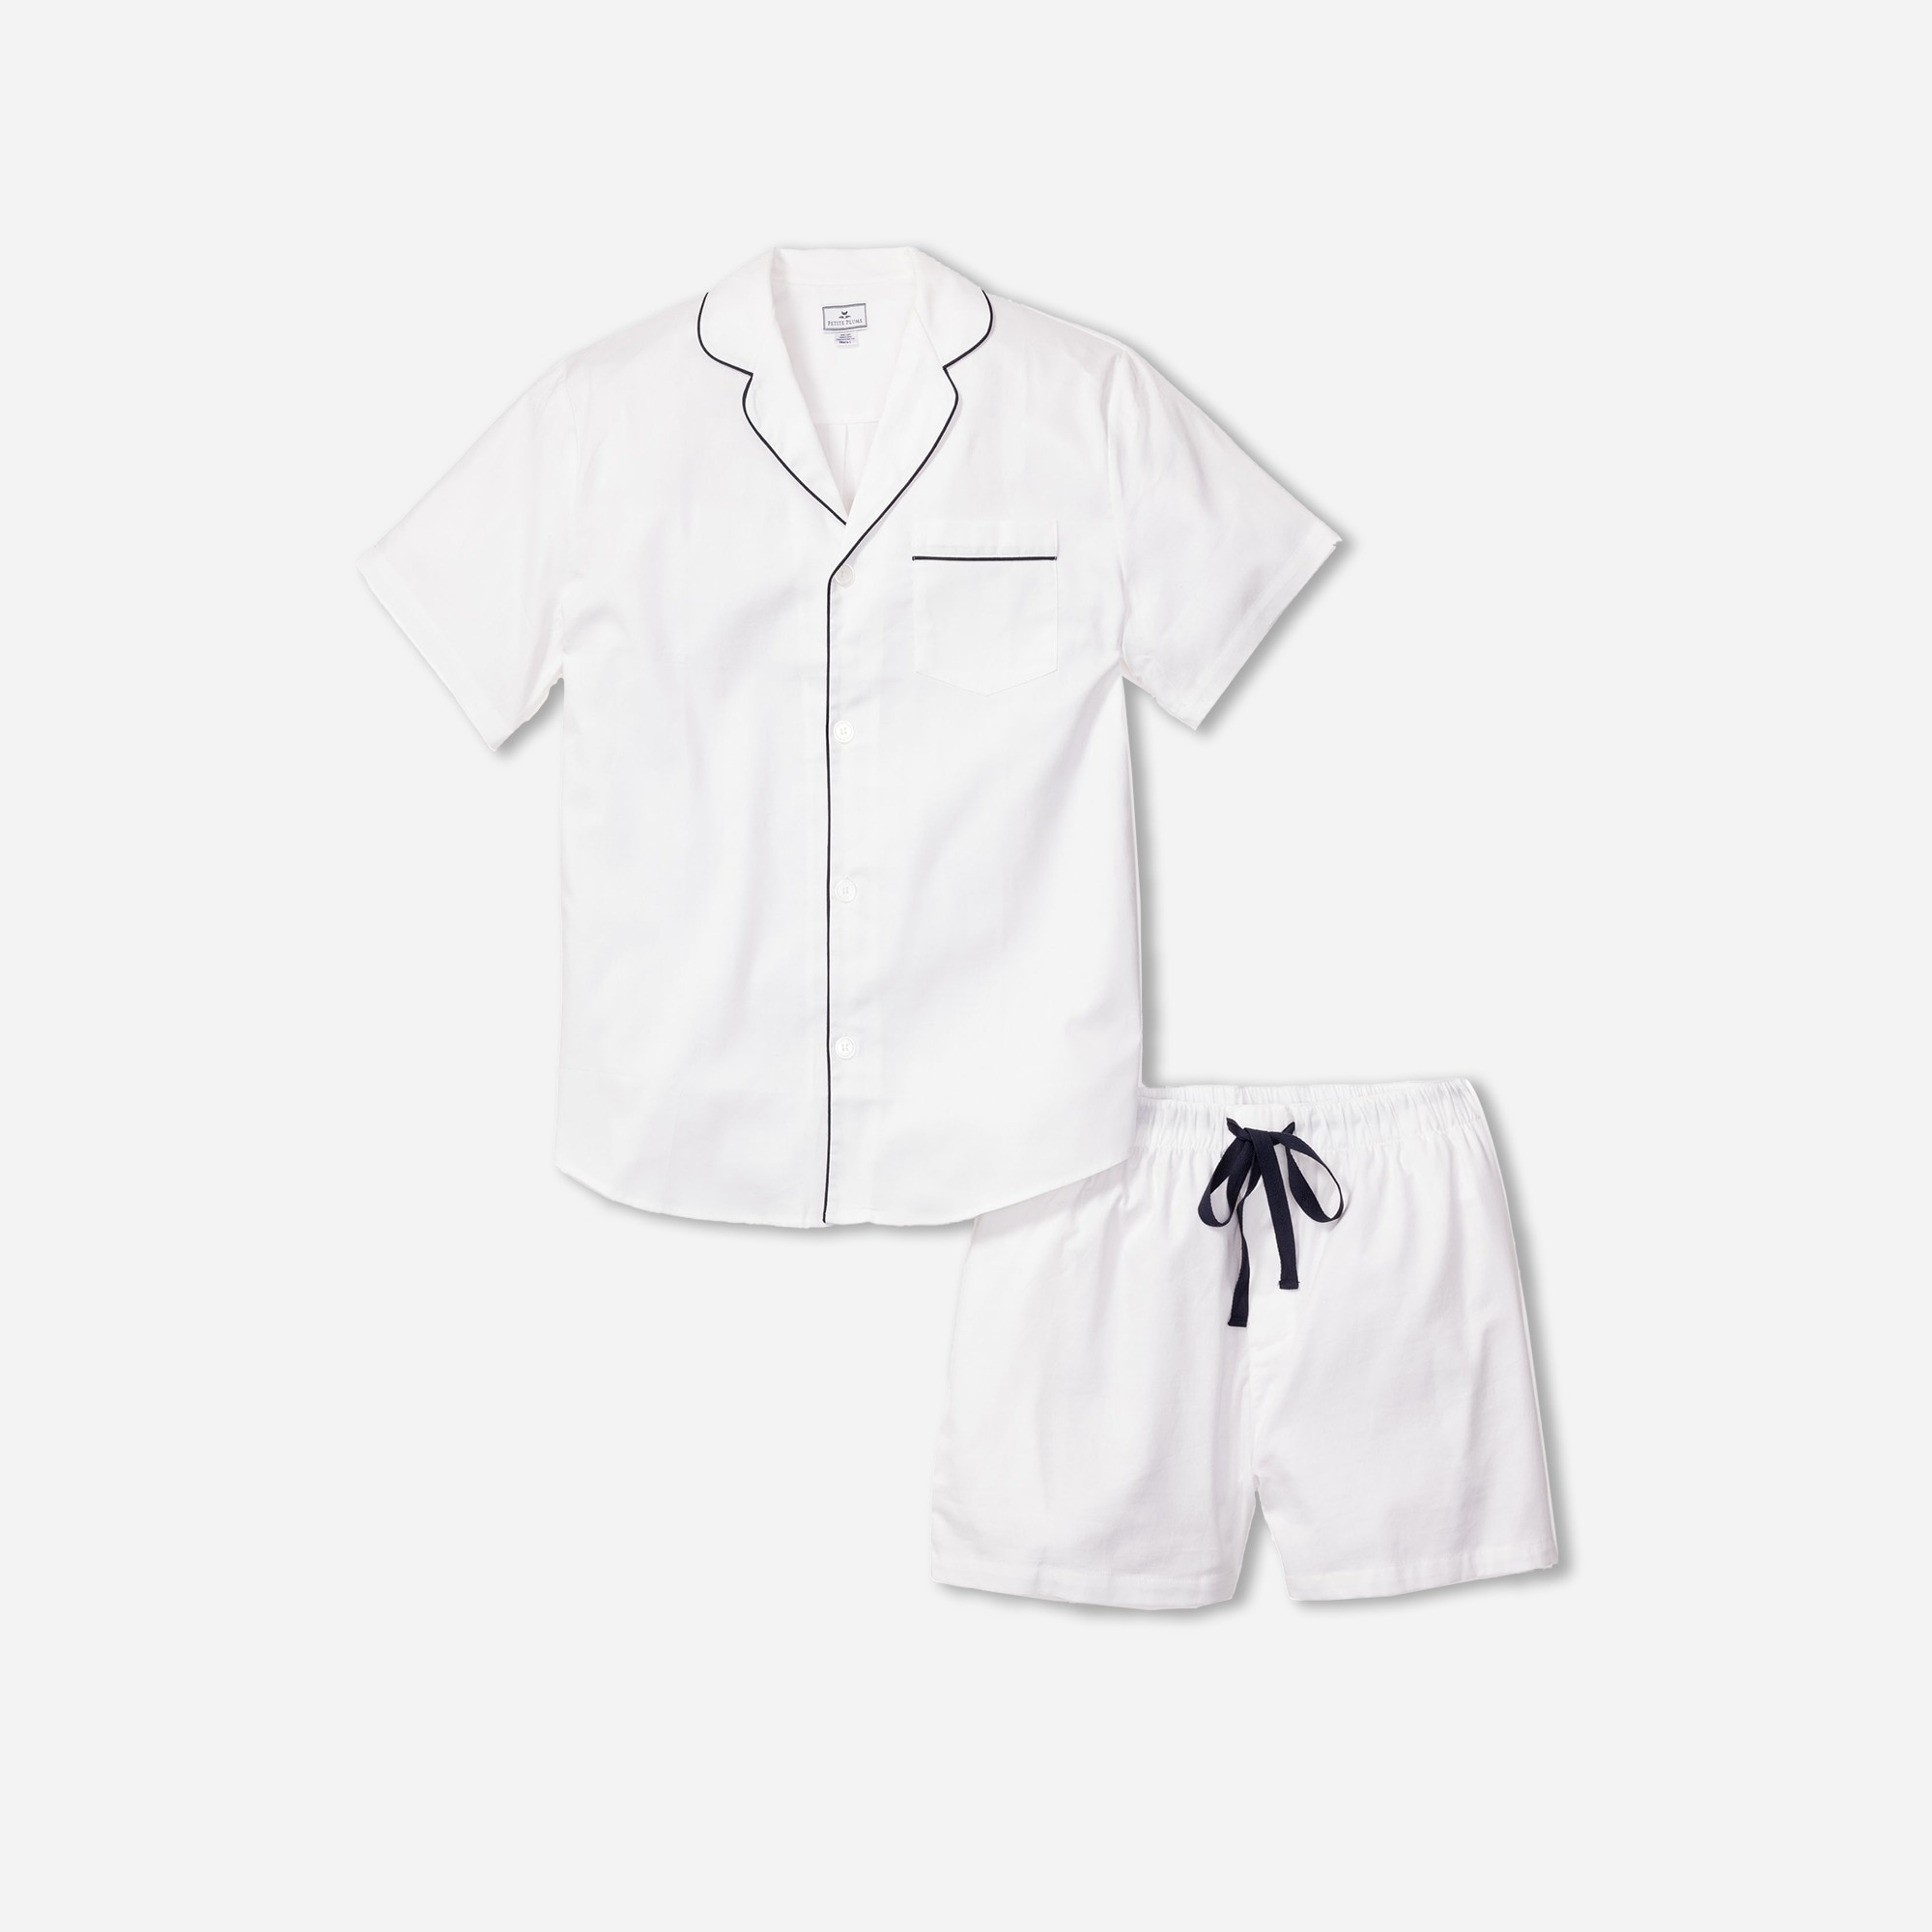 : Petite Plume™ Men's Short Set With Piping For Men